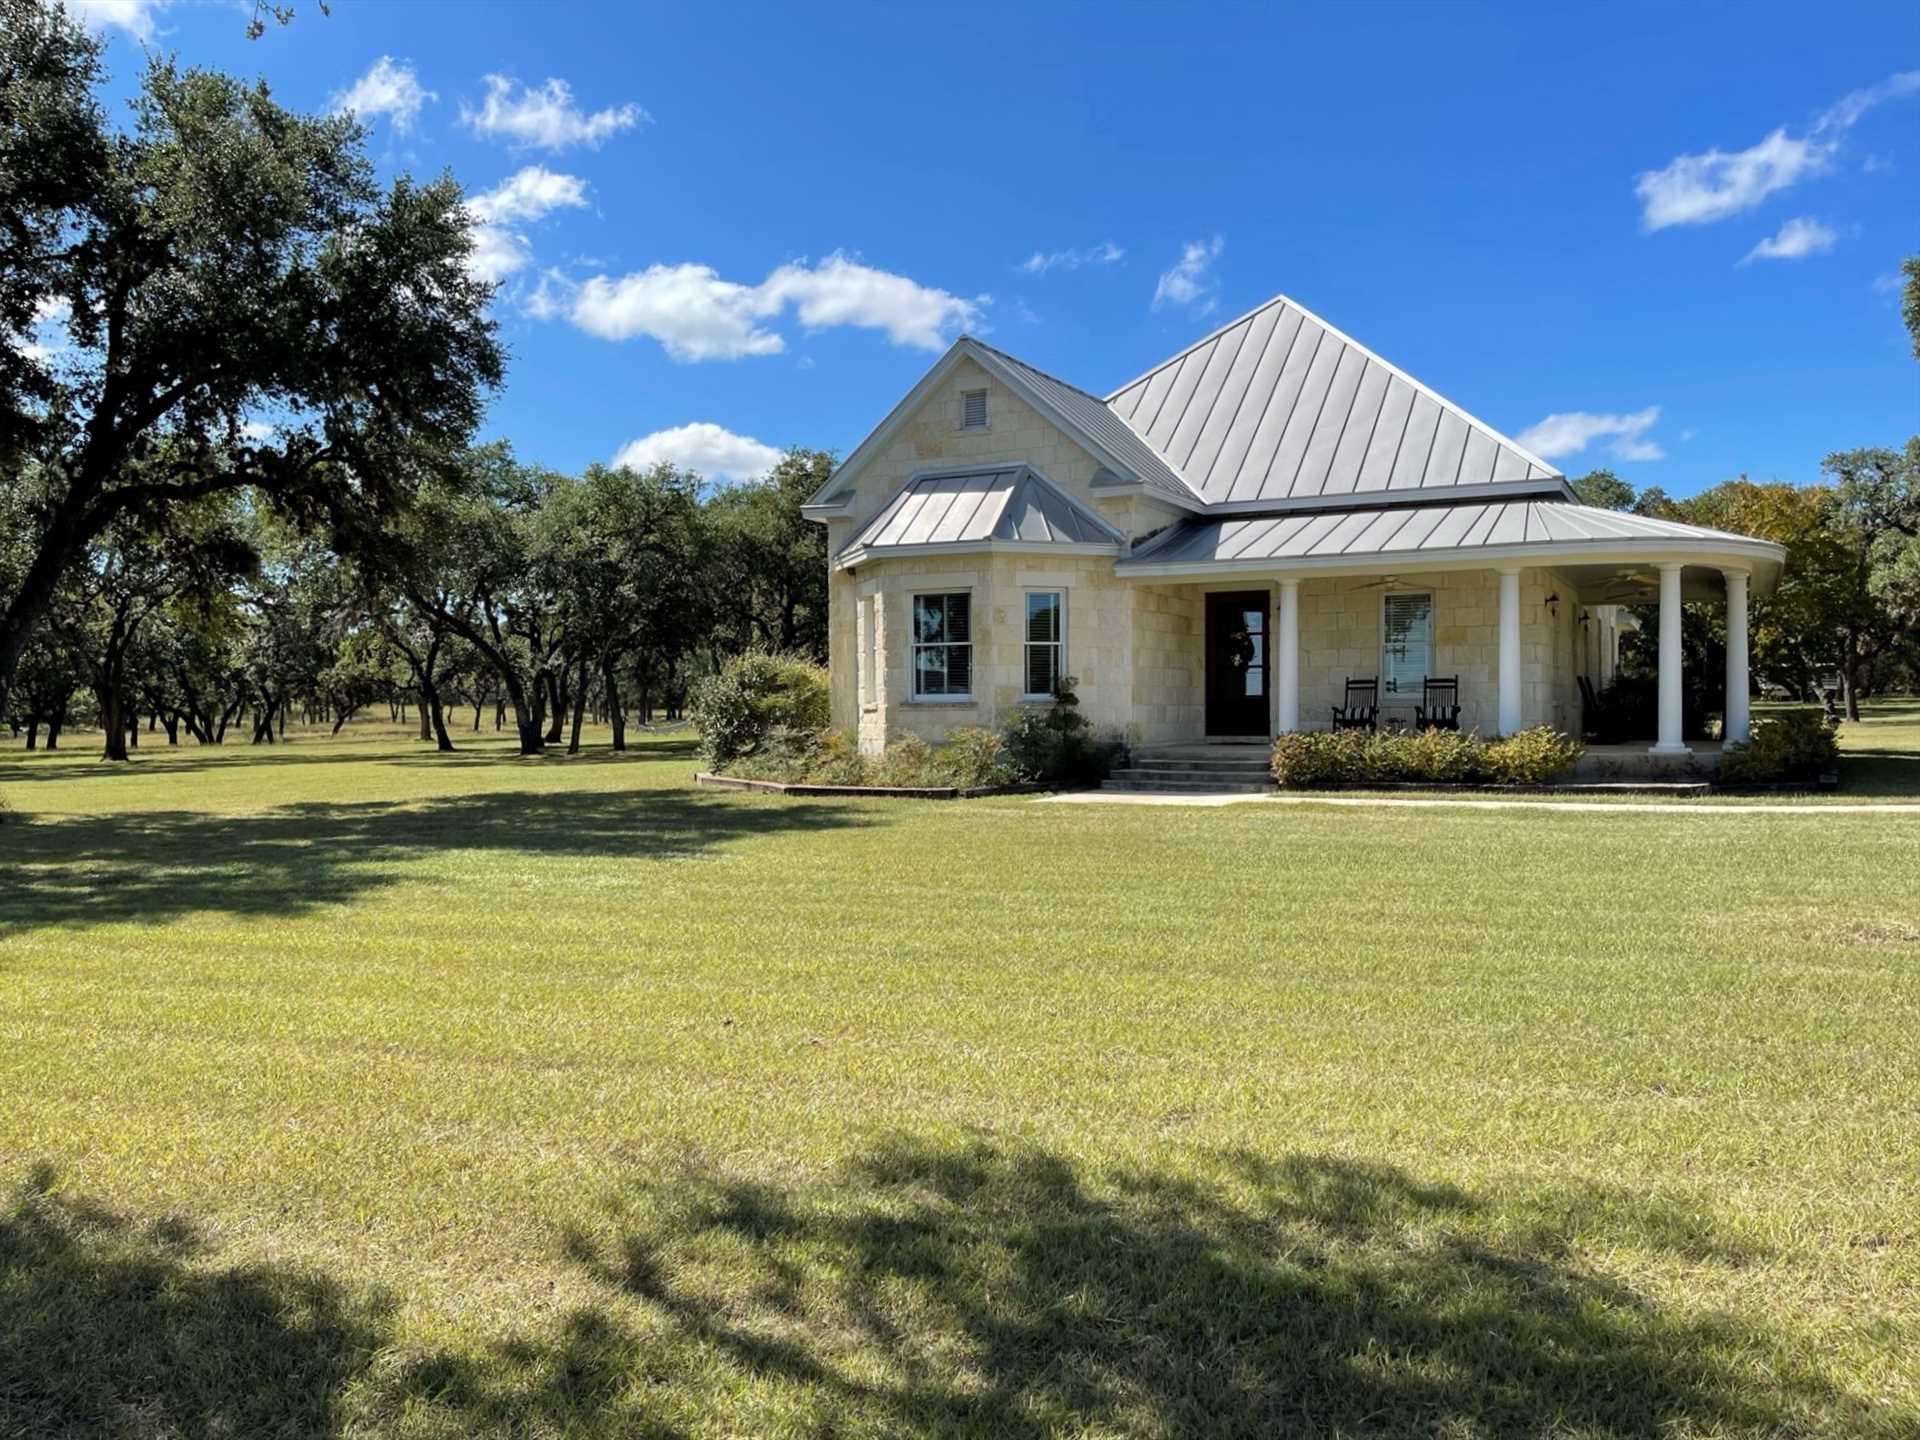                                                 Give your folks the royal treatment in this amazing Hill Country setting! There's plenty of scenic space for watching sunsets, stargazing, and spotting wildlife here.